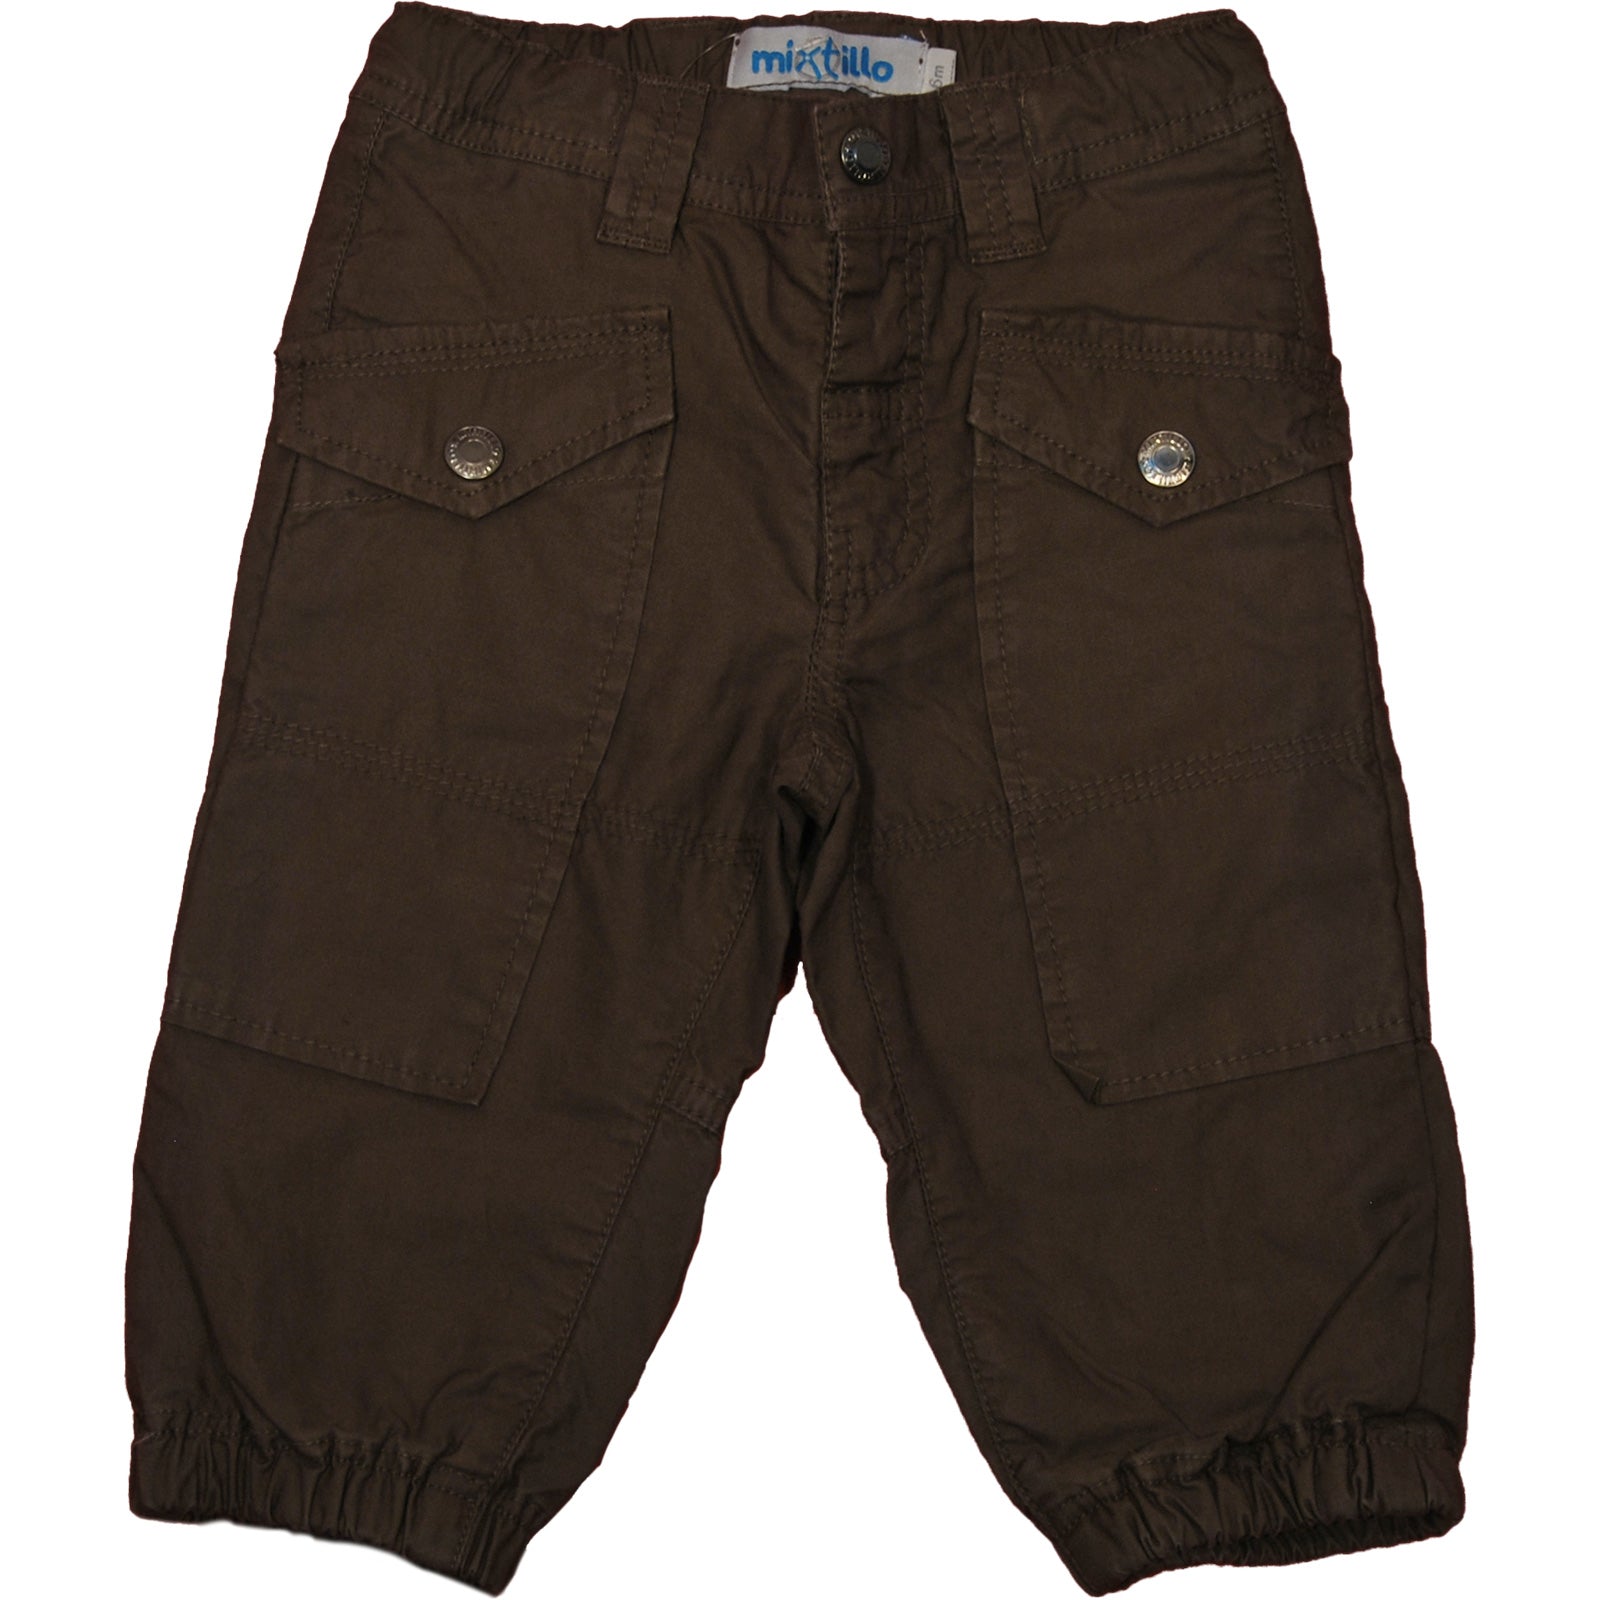 
  Trousers from the children's clothing line Mirtillo with side and back pockets, adjustable wai...